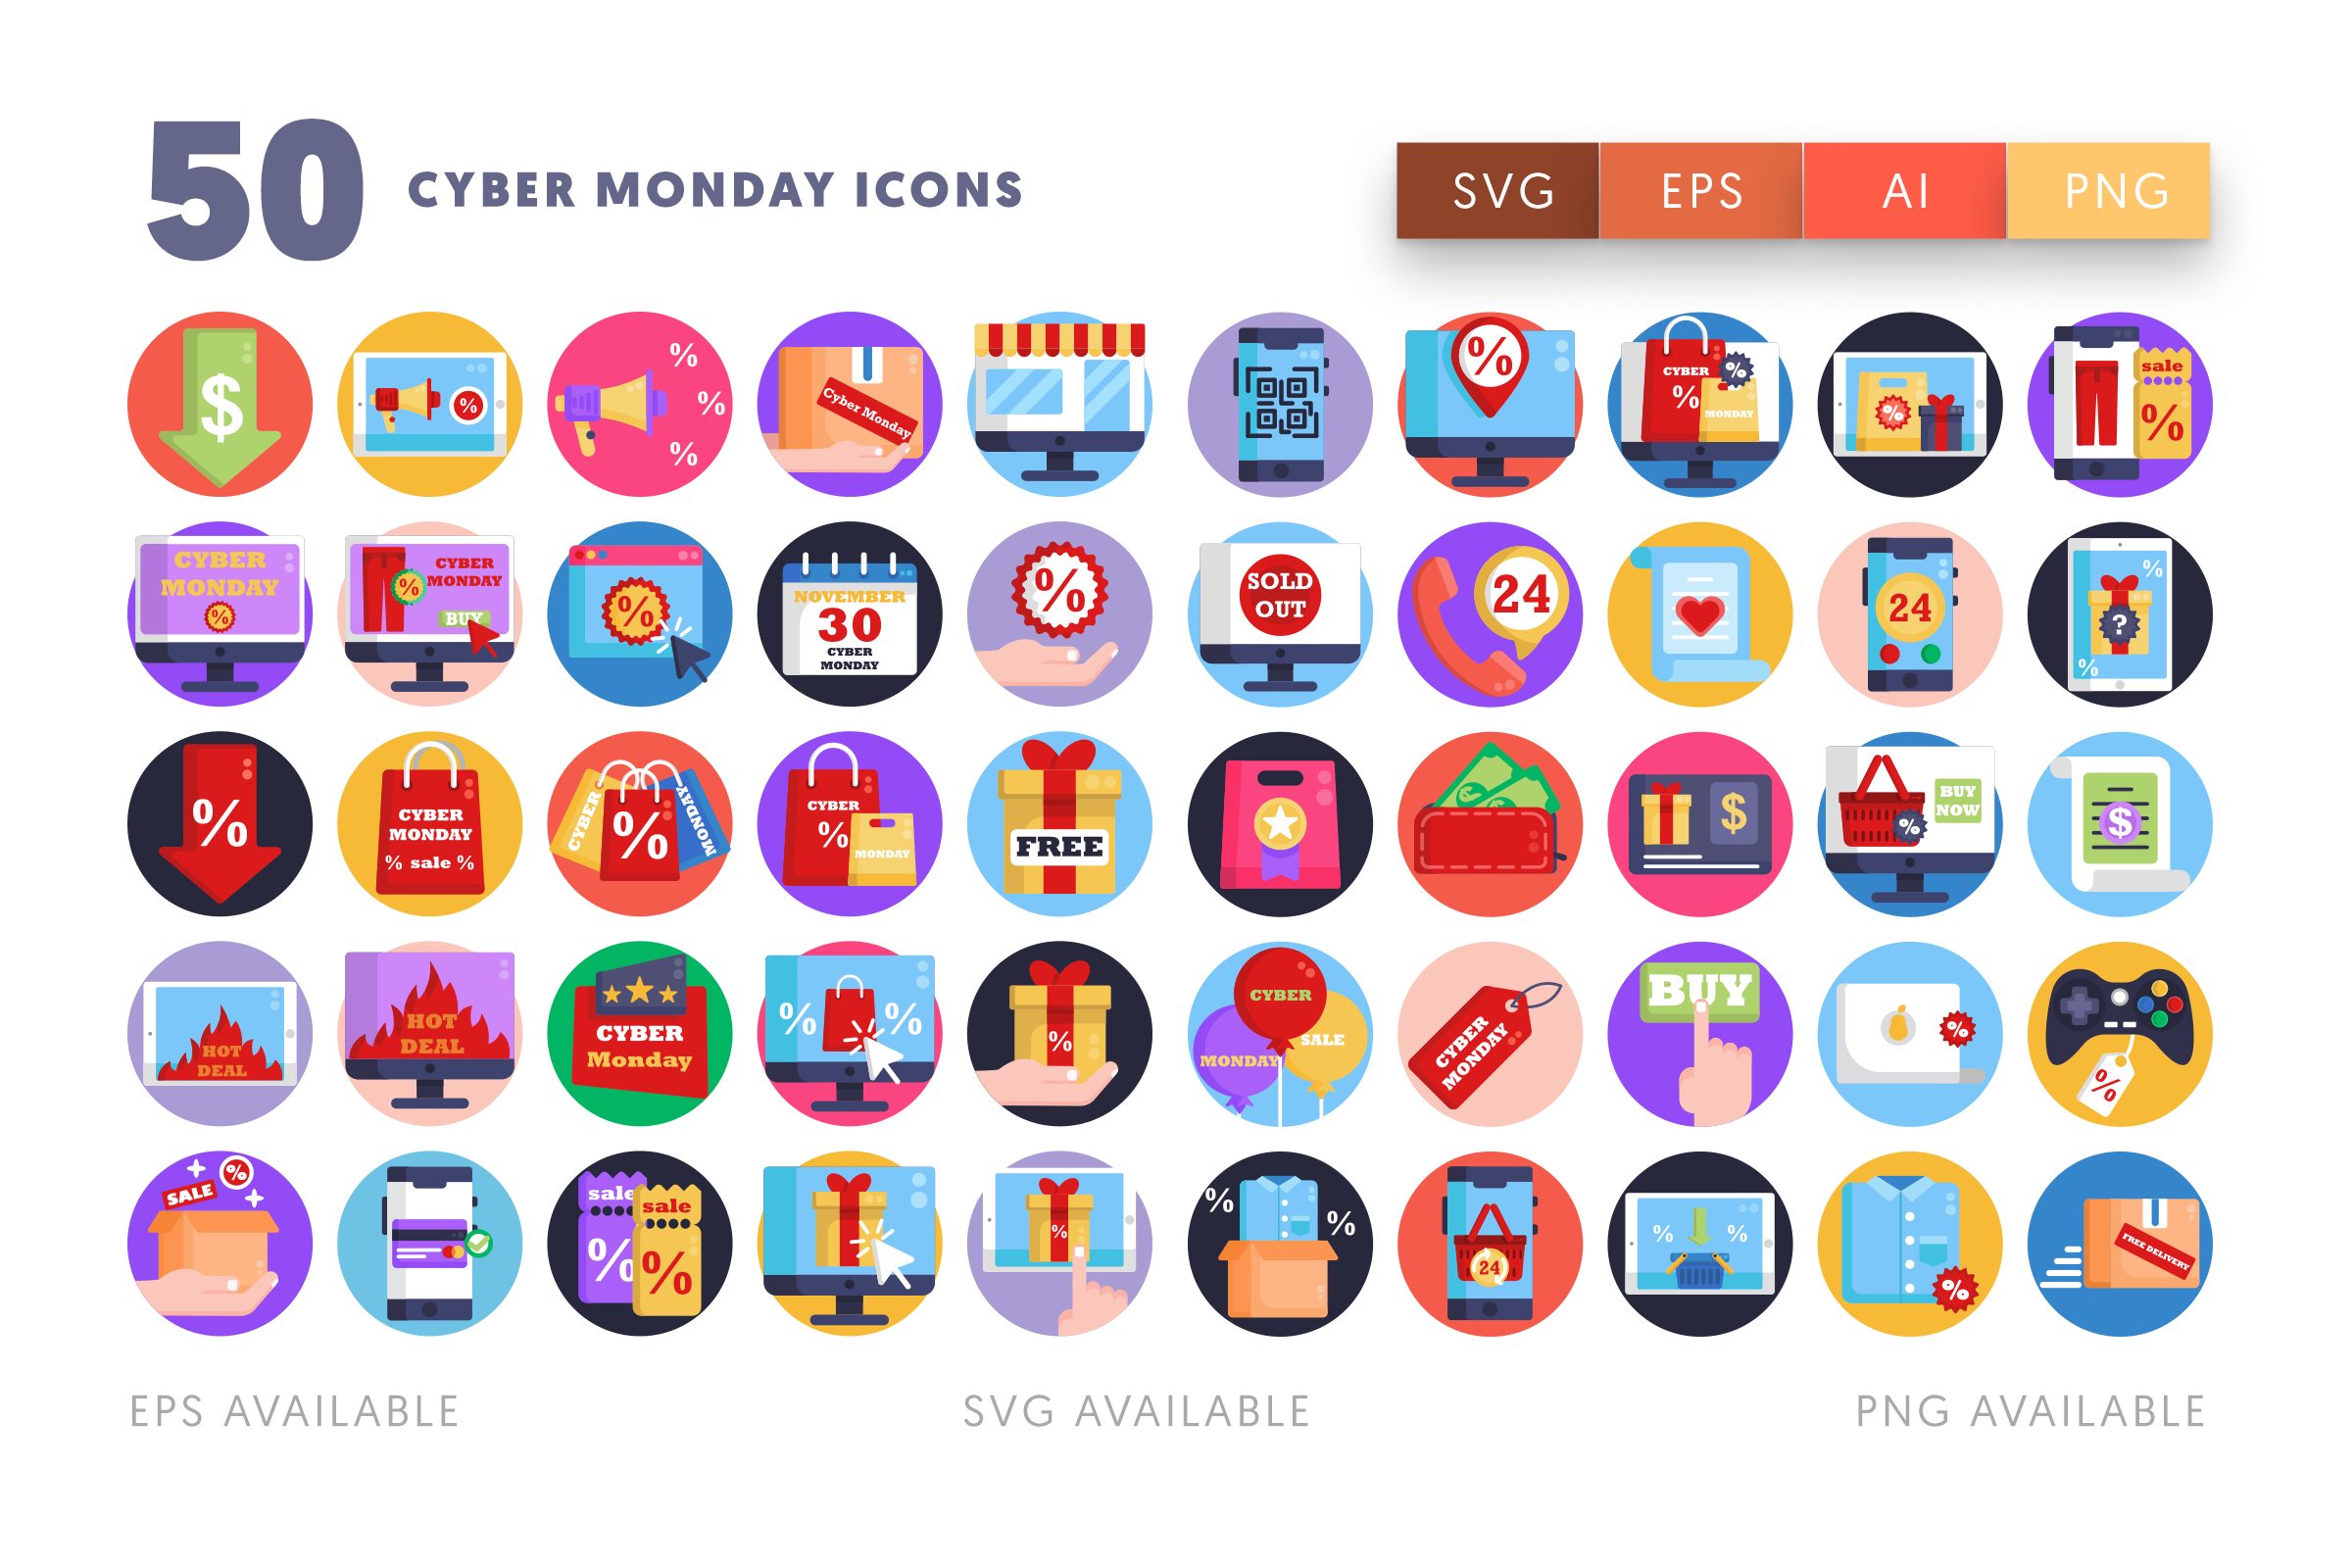 Cyber Monday icons png/svg/eps